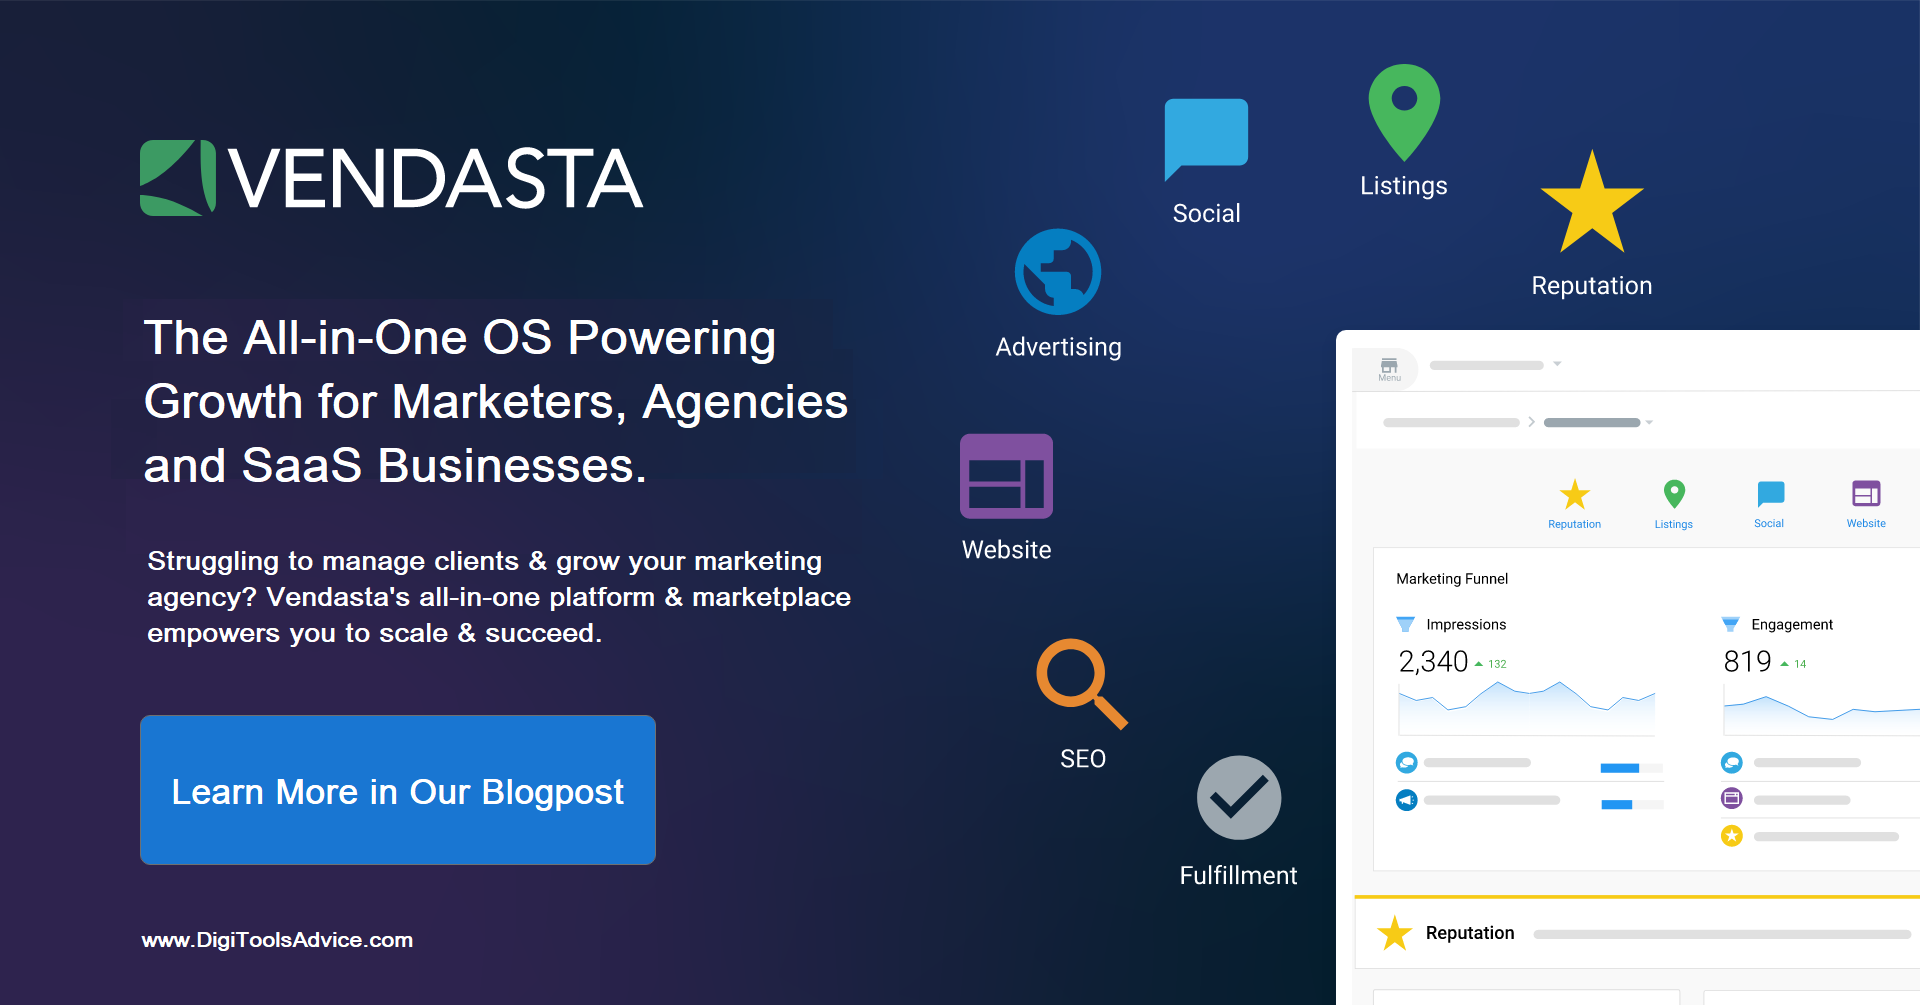 Vendasta: The All-in-One OS Powering Growth for Marketers, Agencies, and SaaS Businesses.